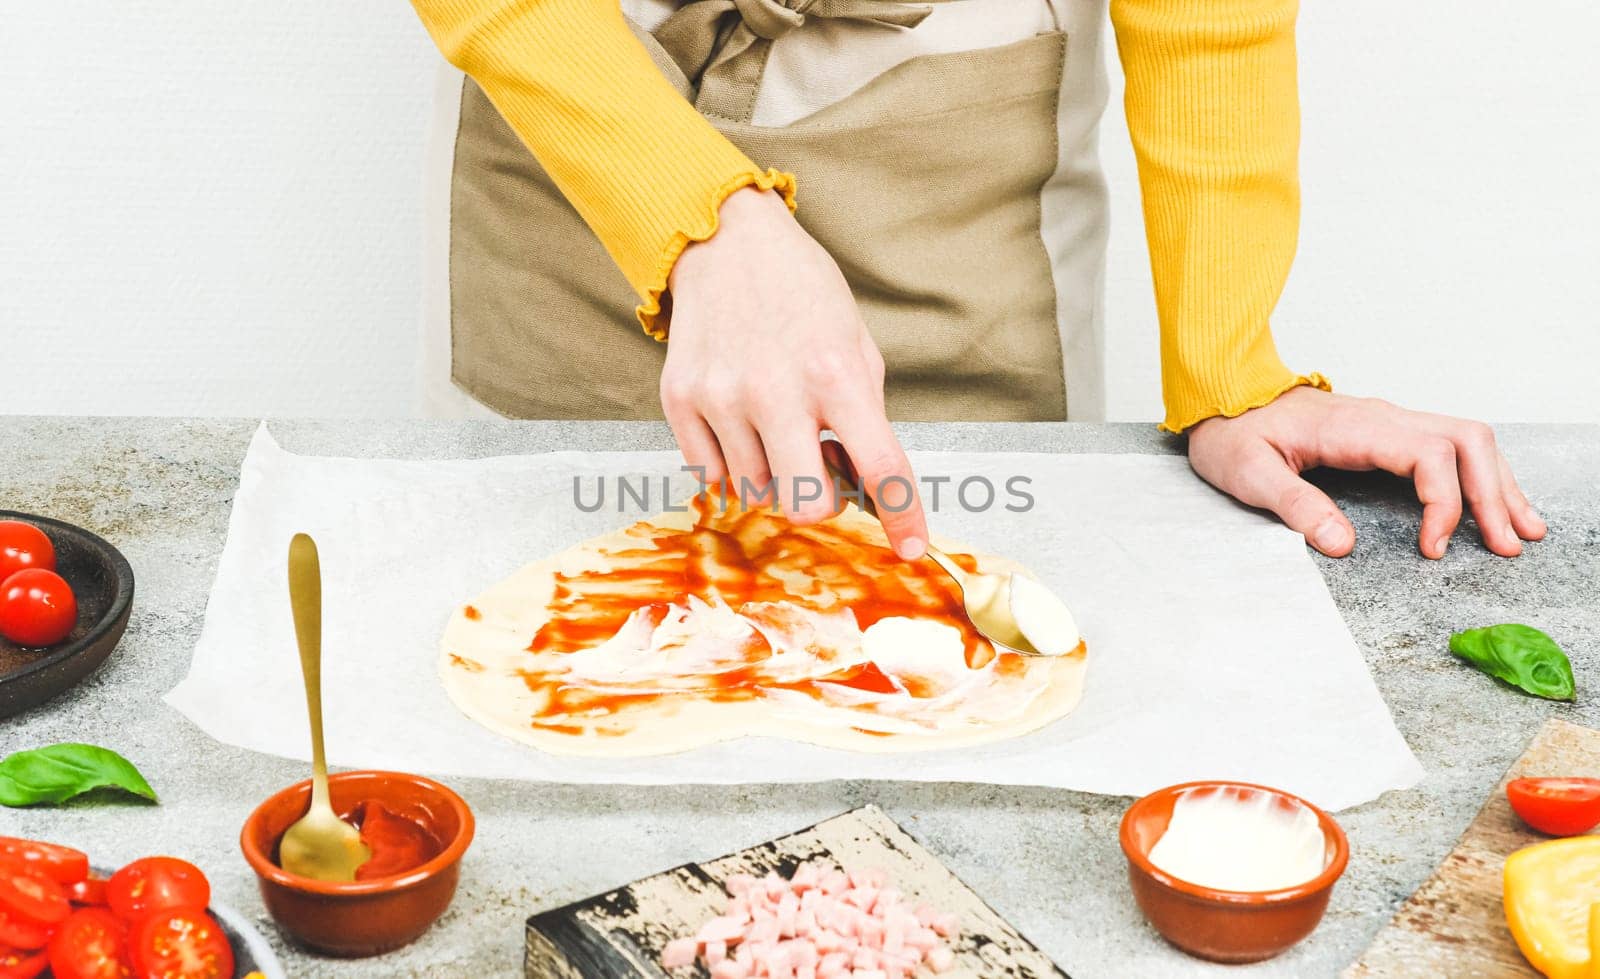 Hands of a Caucasian teenage girl smear a spoonful of pizza sauce on a heart-shaped dough on baking paper with wooden boards and pizza ingredients lie on a light gray table, side view close-up.